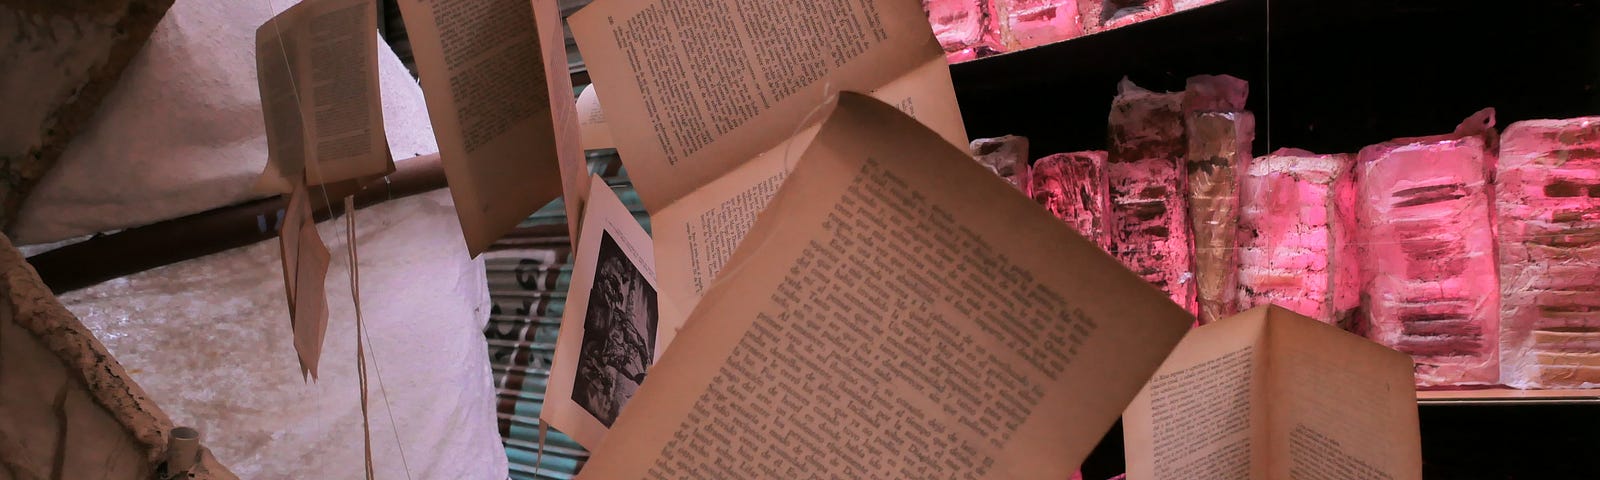 Details of an art installation, with book pages suspended in the foreground.